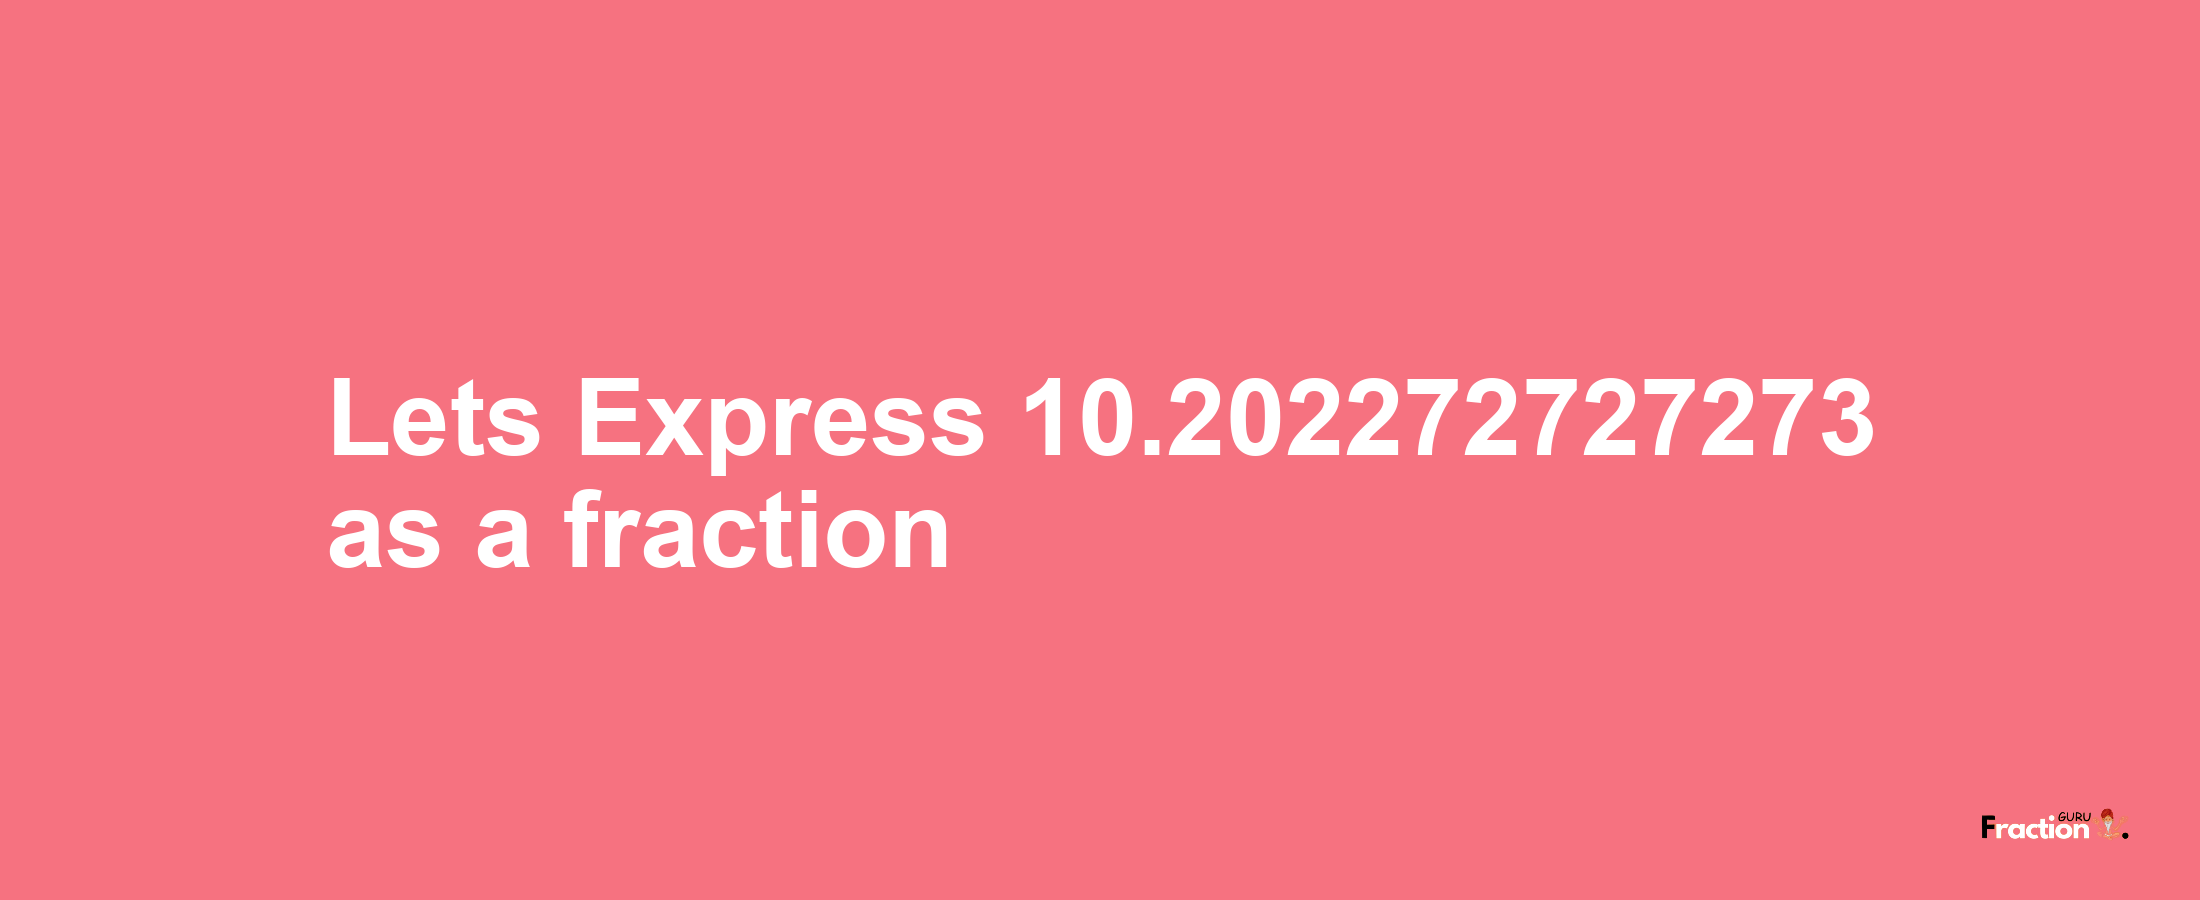 Lets Express 10.202272727273 as afraction